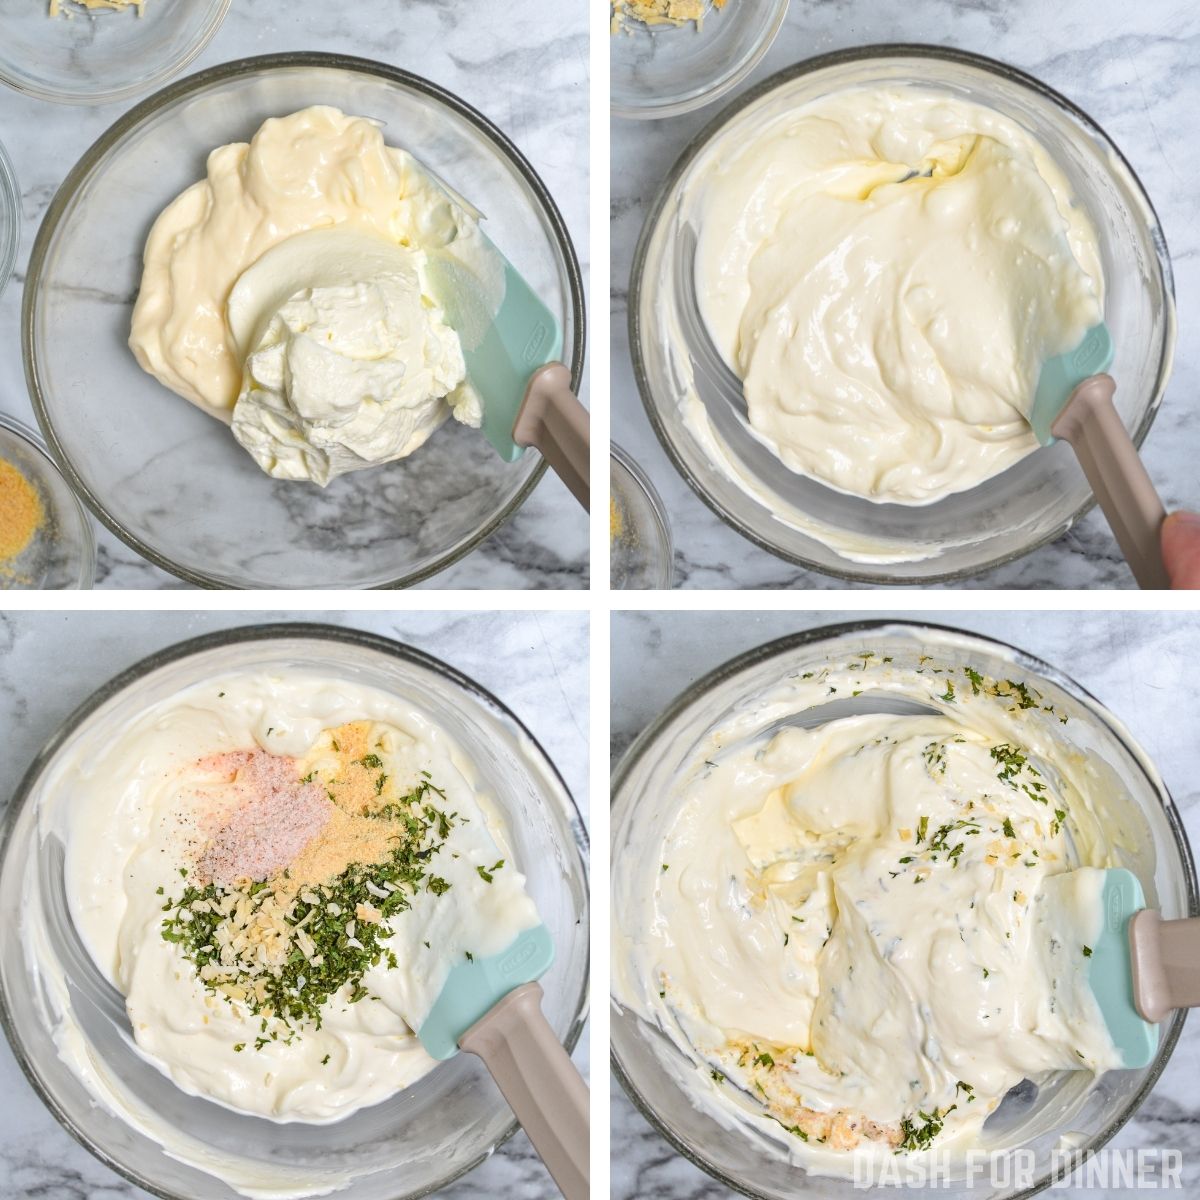 How to mix together seasonings, mayo, and sour cream to make ranch dip.